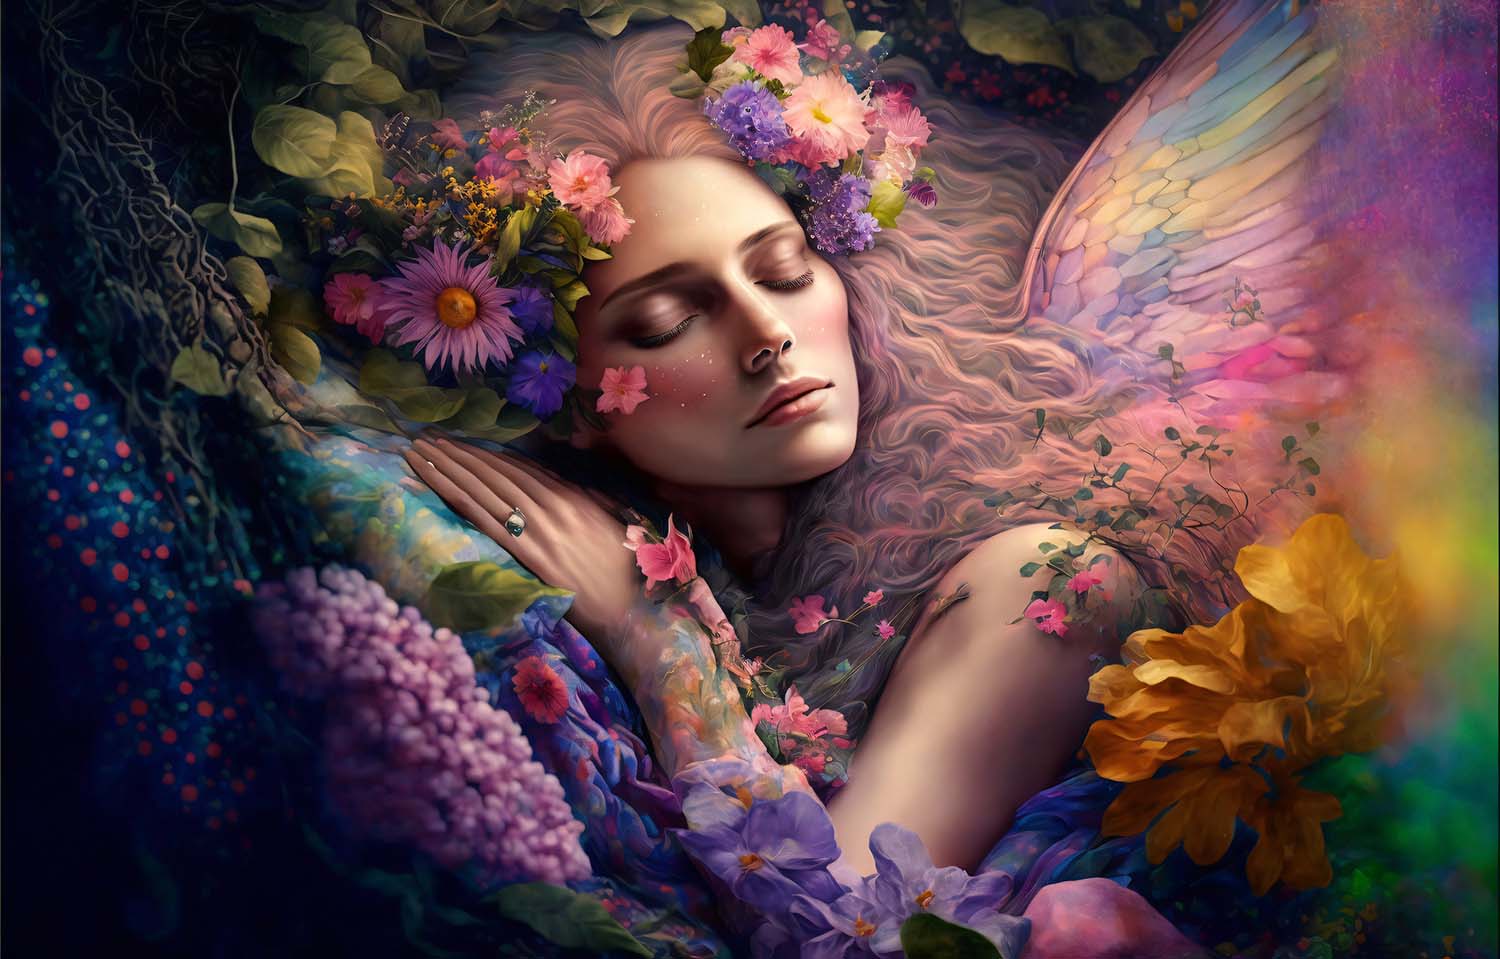 Bed of Flowers Fantasy Jigsaw Puzzle